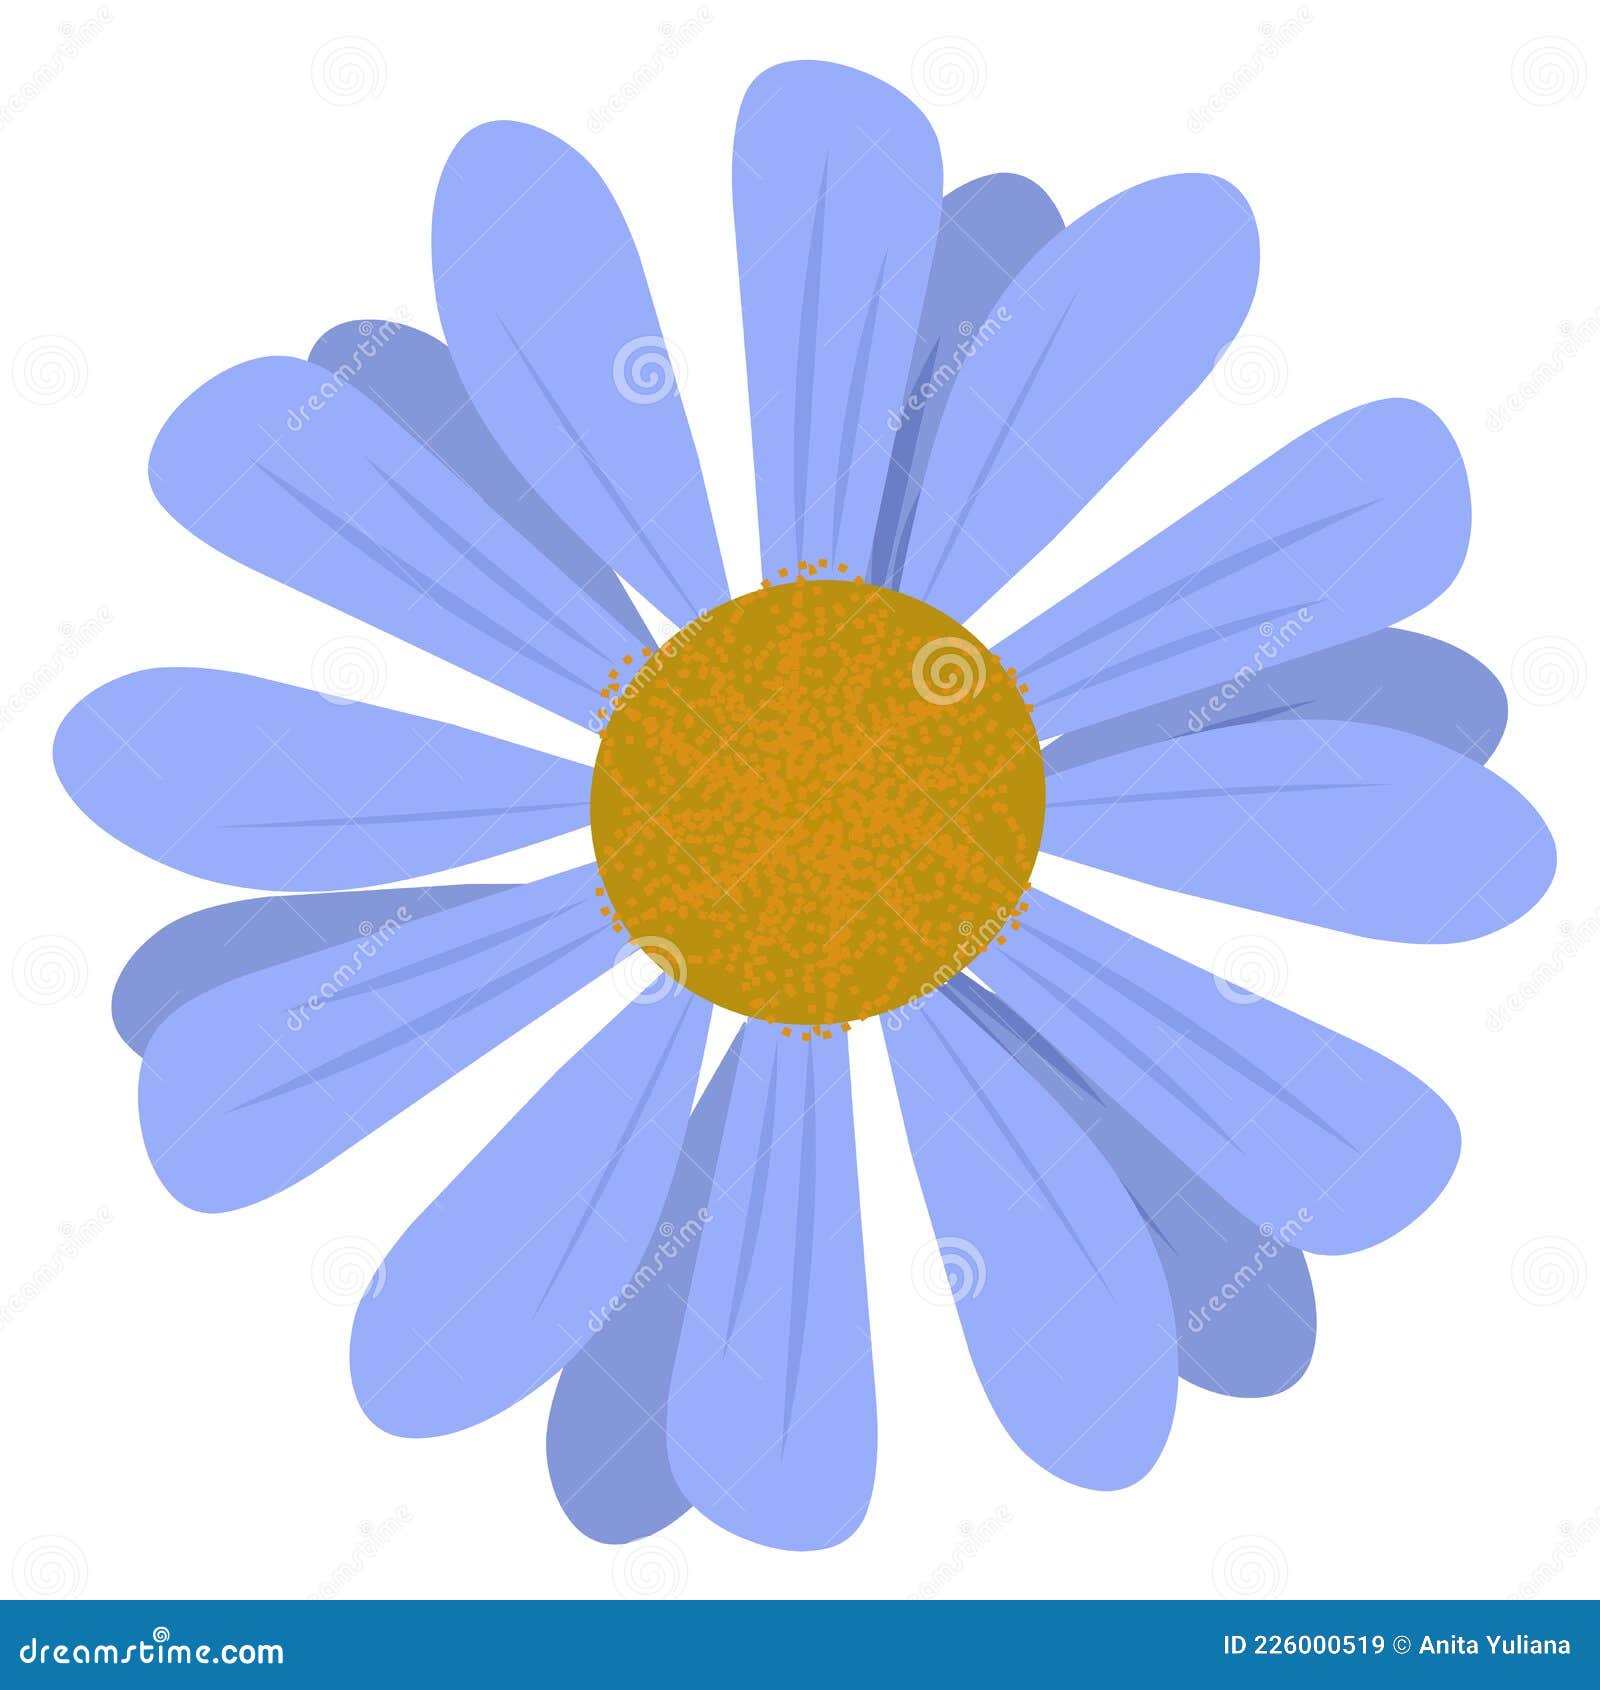 Blue Daisy Flower with Yellow Buds Drawing. Vertical View. Cartoon  Illustration. Stock Illustration - Illustration of decoration, vertical:  226000519